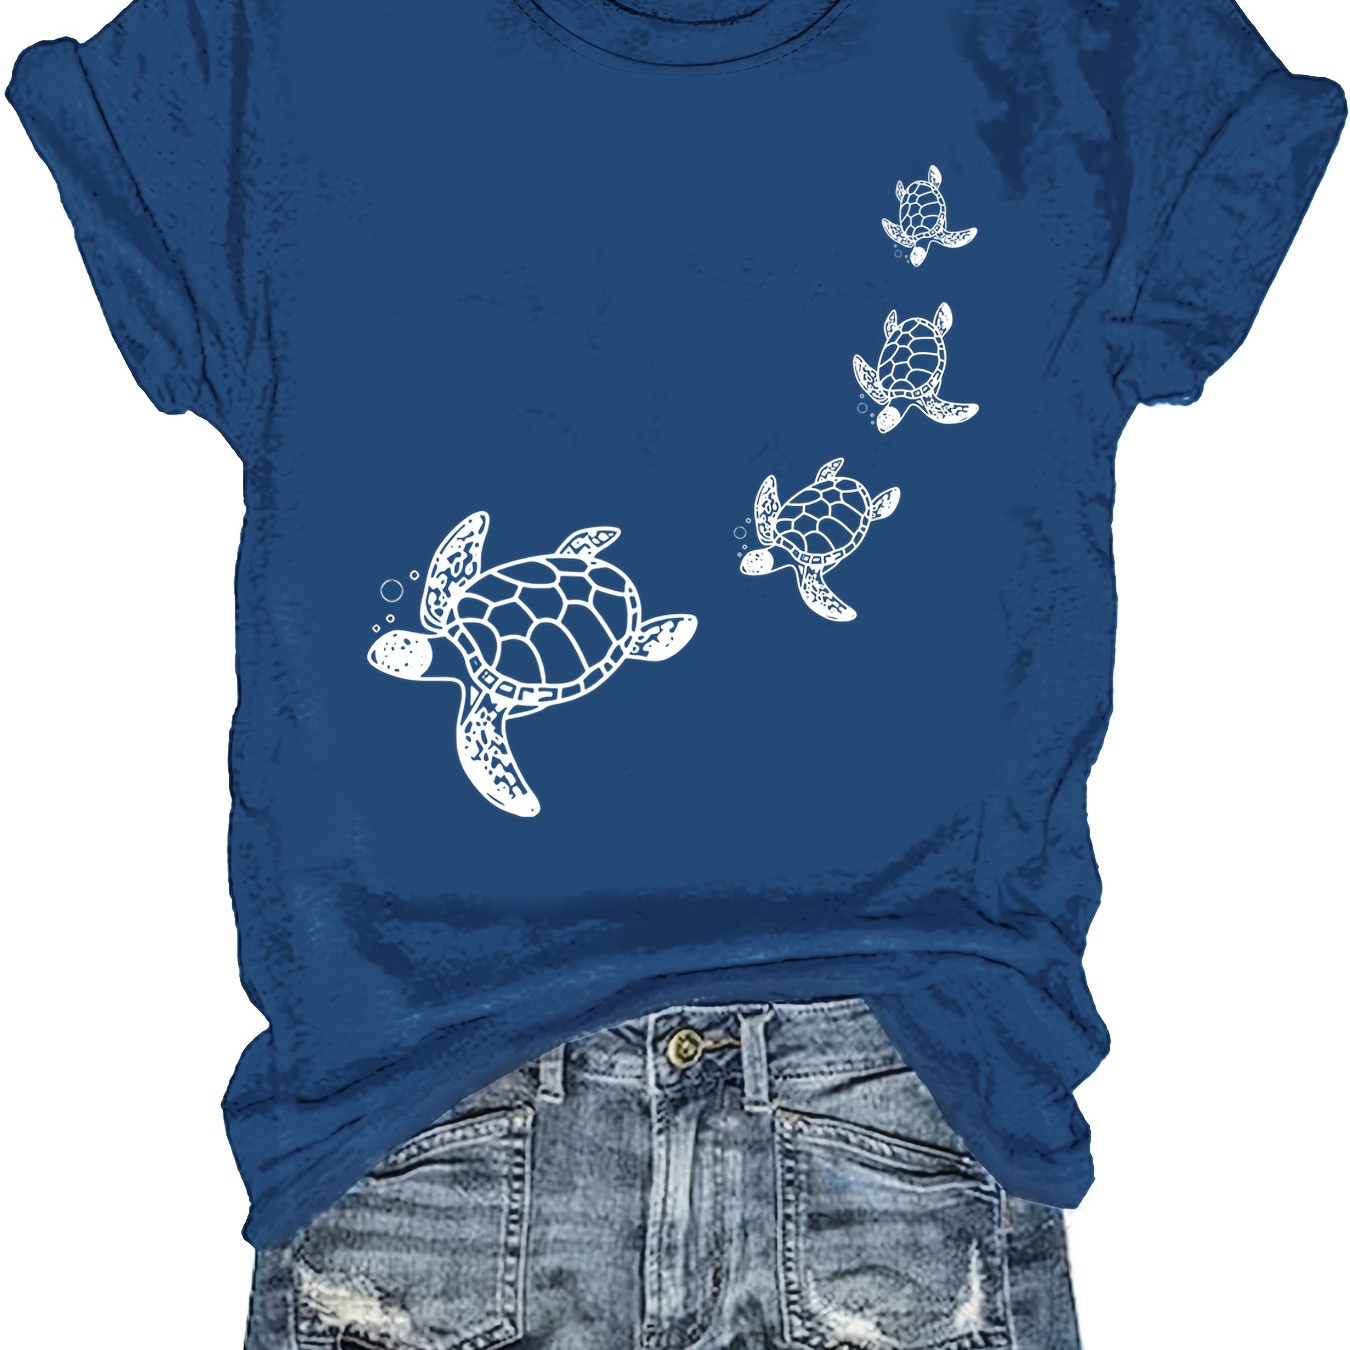 

Sea Turtles Print T-shirt, Short Sleeve Crew Neck Casual Top For Summer & Spring, Women's Clothing